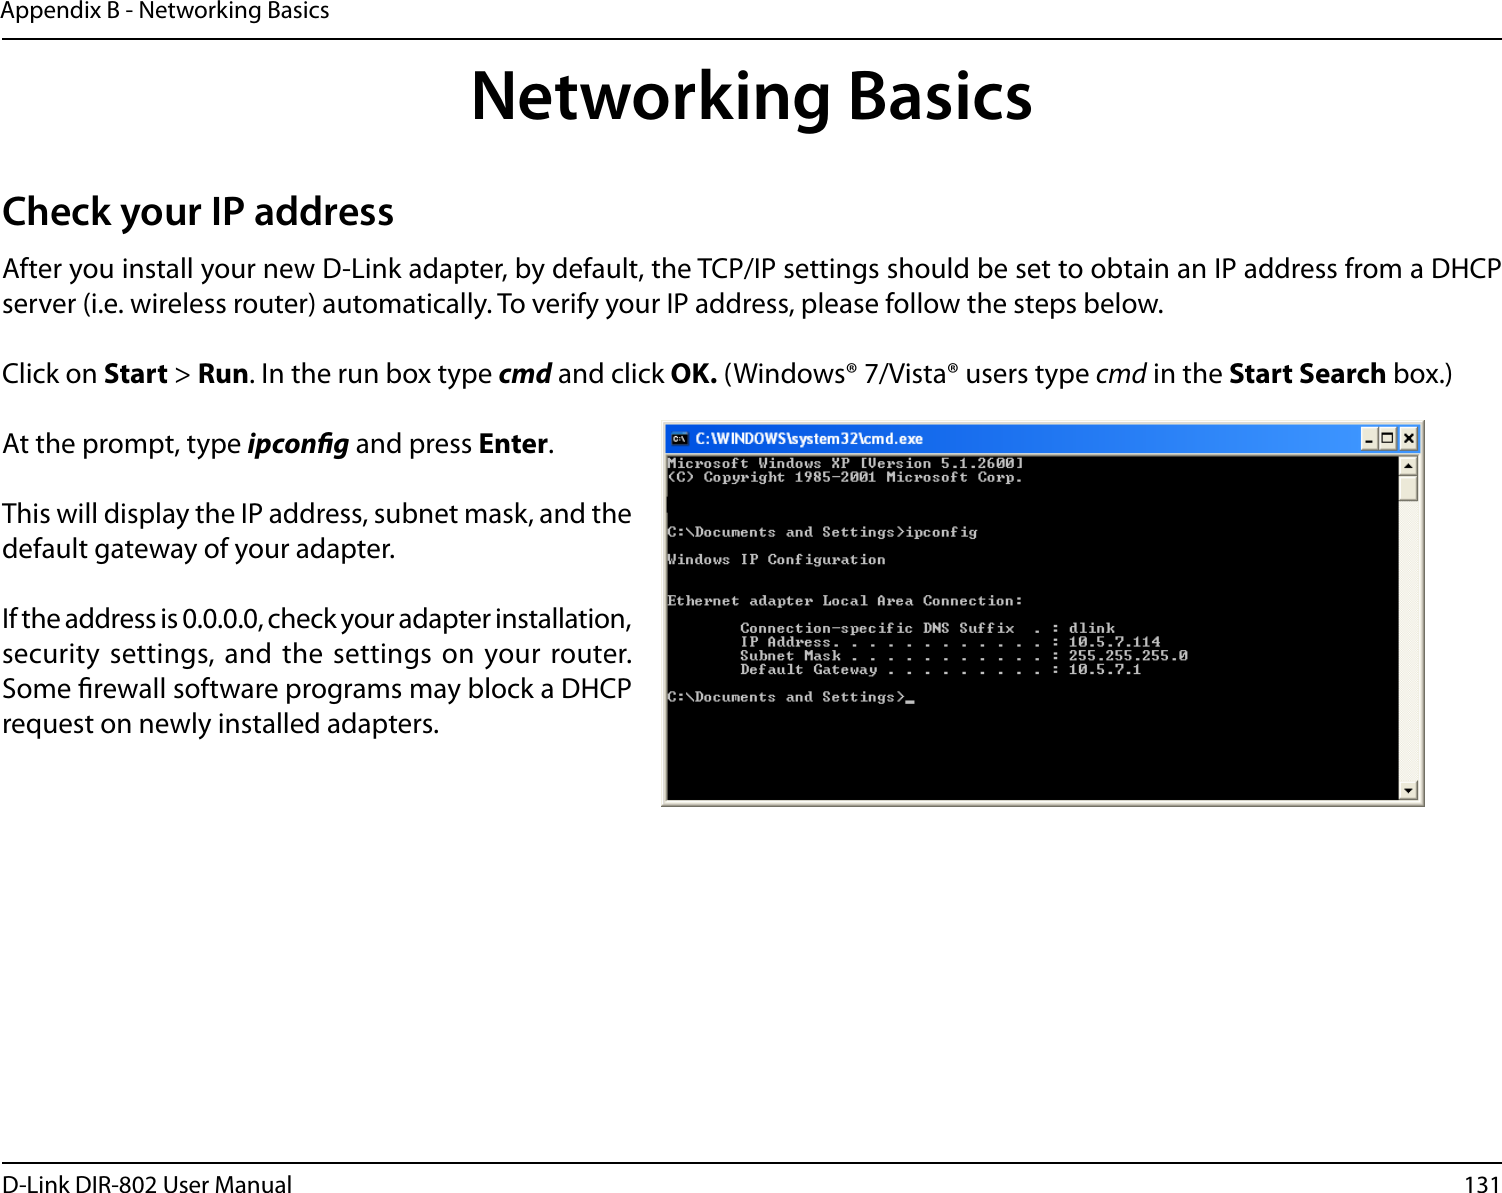 131D-Link DIR-802 User ManualAppendix B - Networking BasicsNetworking BasicsCheck your IP addressAfter you install your new D-Link adapter, by default, the TCP/IP settings should be set to obtain an IP address from a DHCP server (i.e. wireless router) automatically. To verify your IP address, please follow the steps below.Click on Start &gt; Run. In the run box type cmd and click OK. (Windows® 7/Vista® users type cmd in the Start Search box.)At the prompt, type ipcong and press Enter.This will display the IP address, subnet mask, and the default gateway of your adapter.If the address is 0.0.0.0, check your adapter installation, security  settings, and the settings on your router. Some rewall software programs may block a DHCP request on newly installed adapters. 